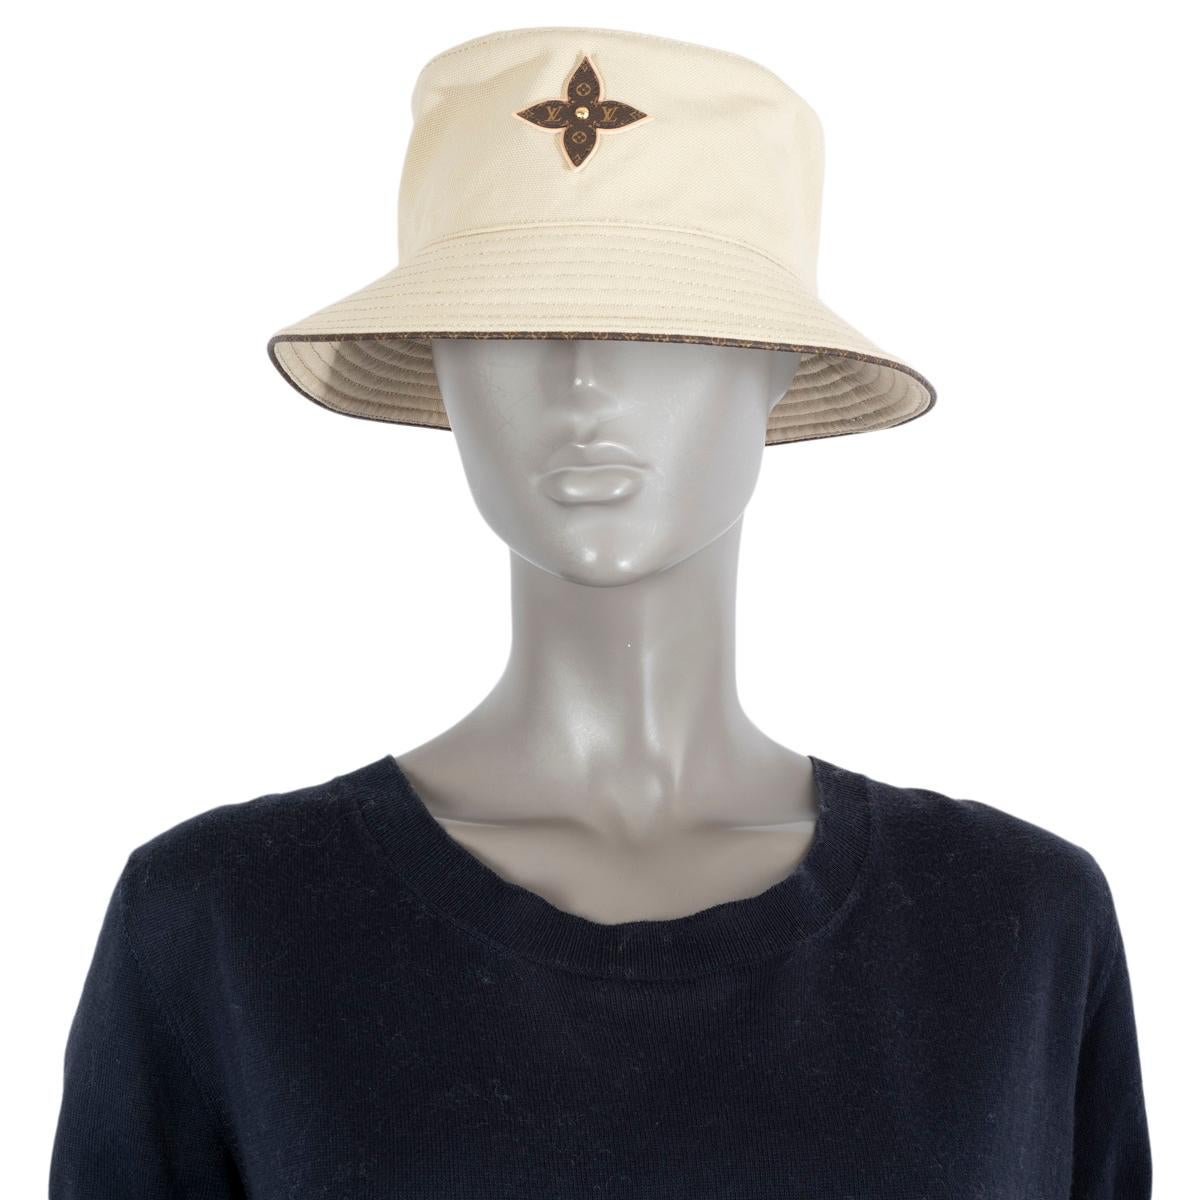 100% authentic Louis Vuitton On Your Way bucket hat in beige cotton (100%) with a leather LV monogram embellishment, LV monogrammed leather trim and matching fabric on the trim. Has been worn and is in excellent